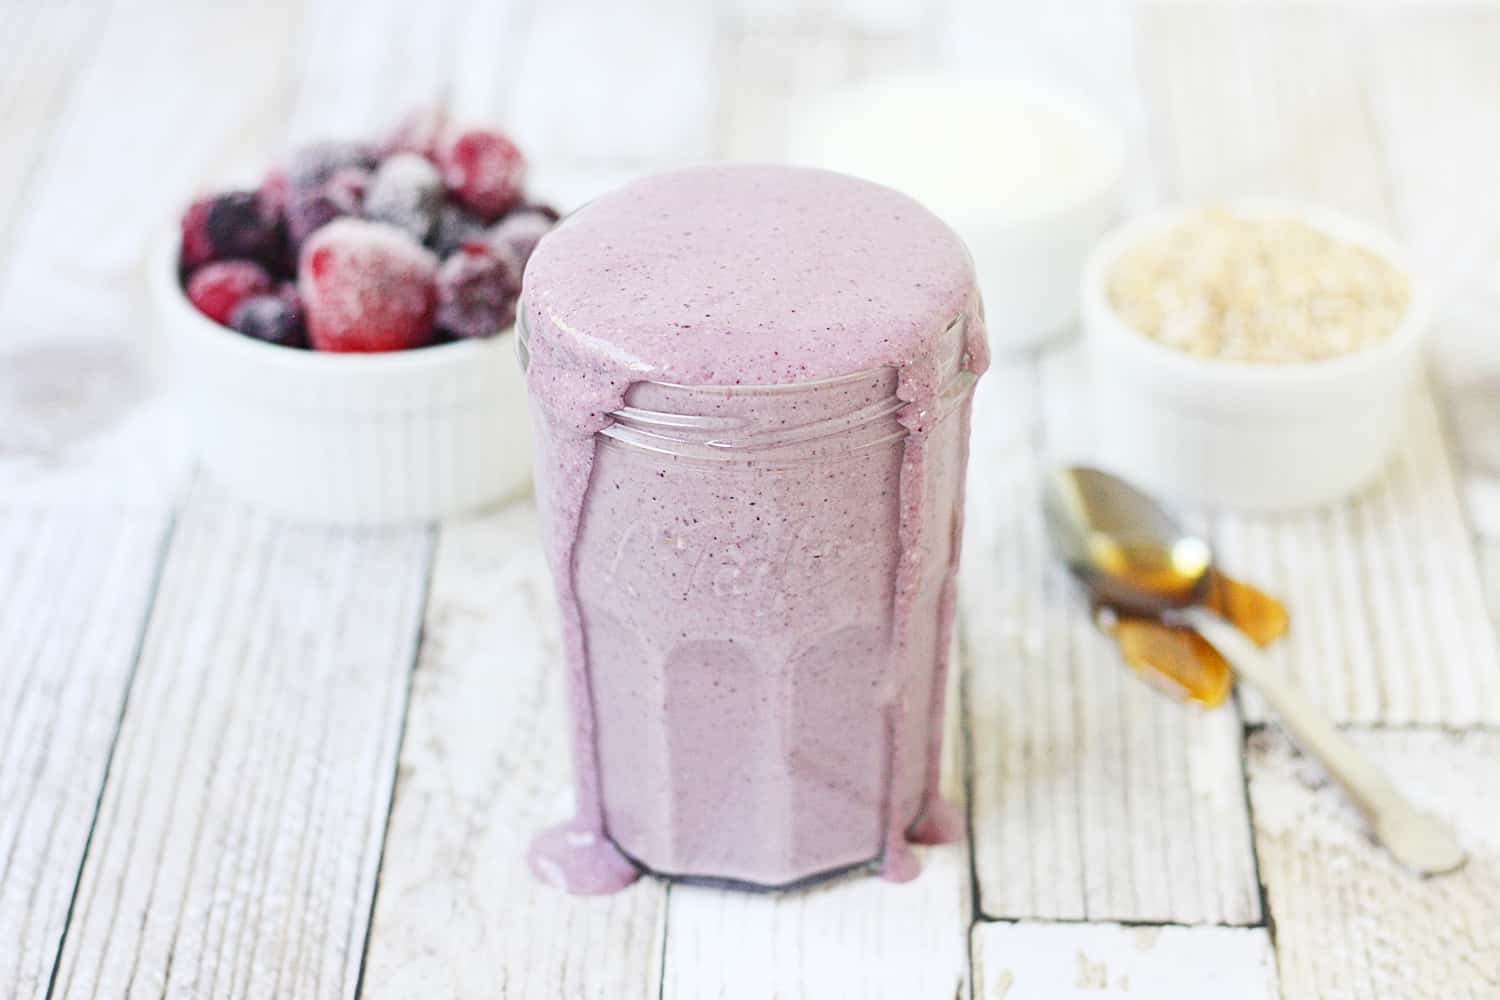 Mixed Berry Protein Smoothie - This mixed berry protein smoothie combines frozen berries, Greek yogurt, steel-cut oats, and protein powder for a healthy, delicious breakfast shake to start your day! #smoothie #proteinshake #proteinsmoothie #shake #breakfast #recipe #berry #halfscratched #ad #easyrecipe